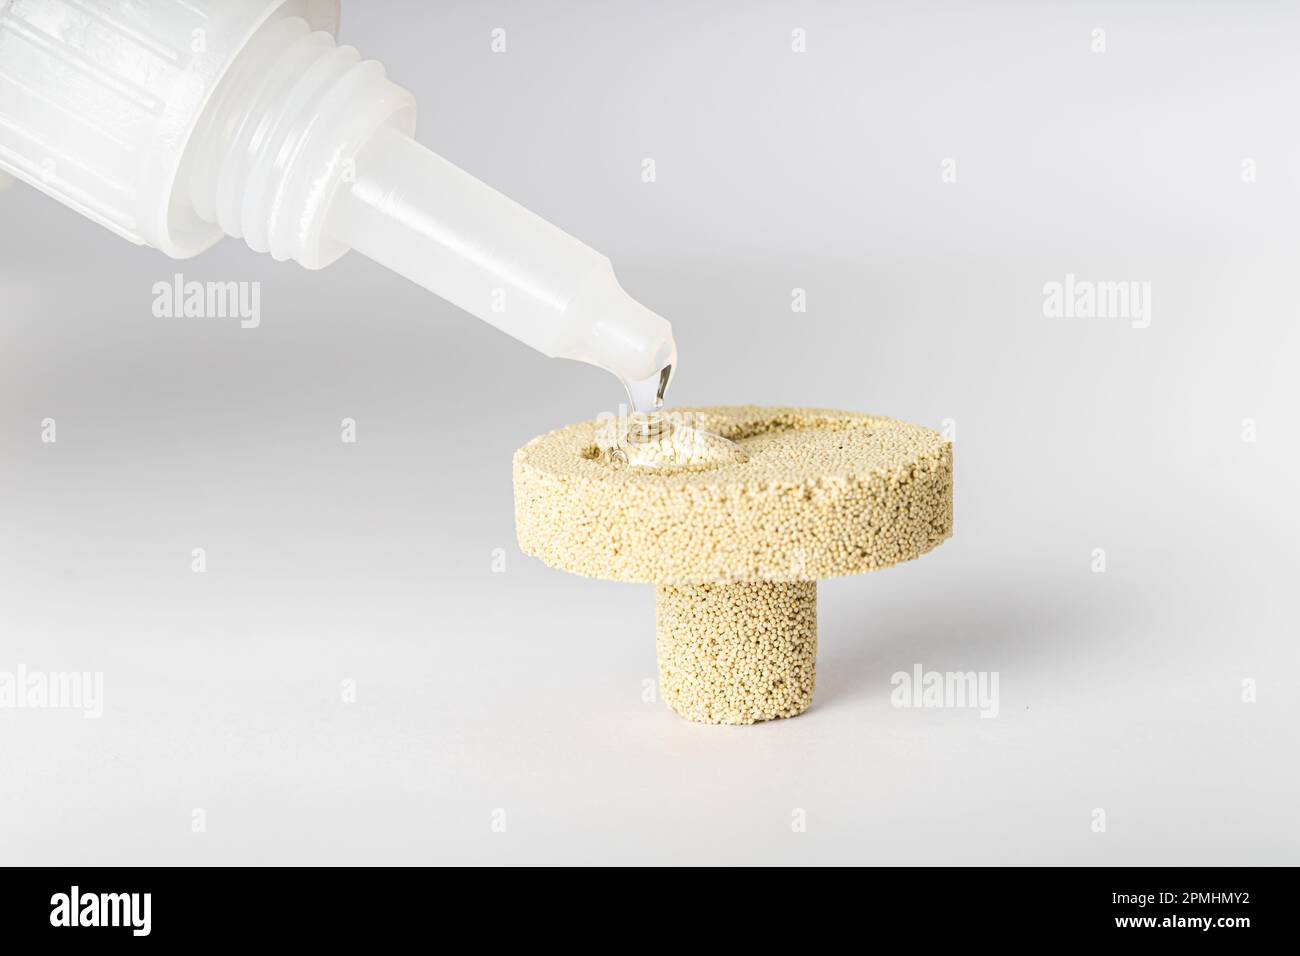 Base made of porous ceramic for fixing corals, widely used in marine aquariums. Using instant glue to fix the coral. Stock Photo